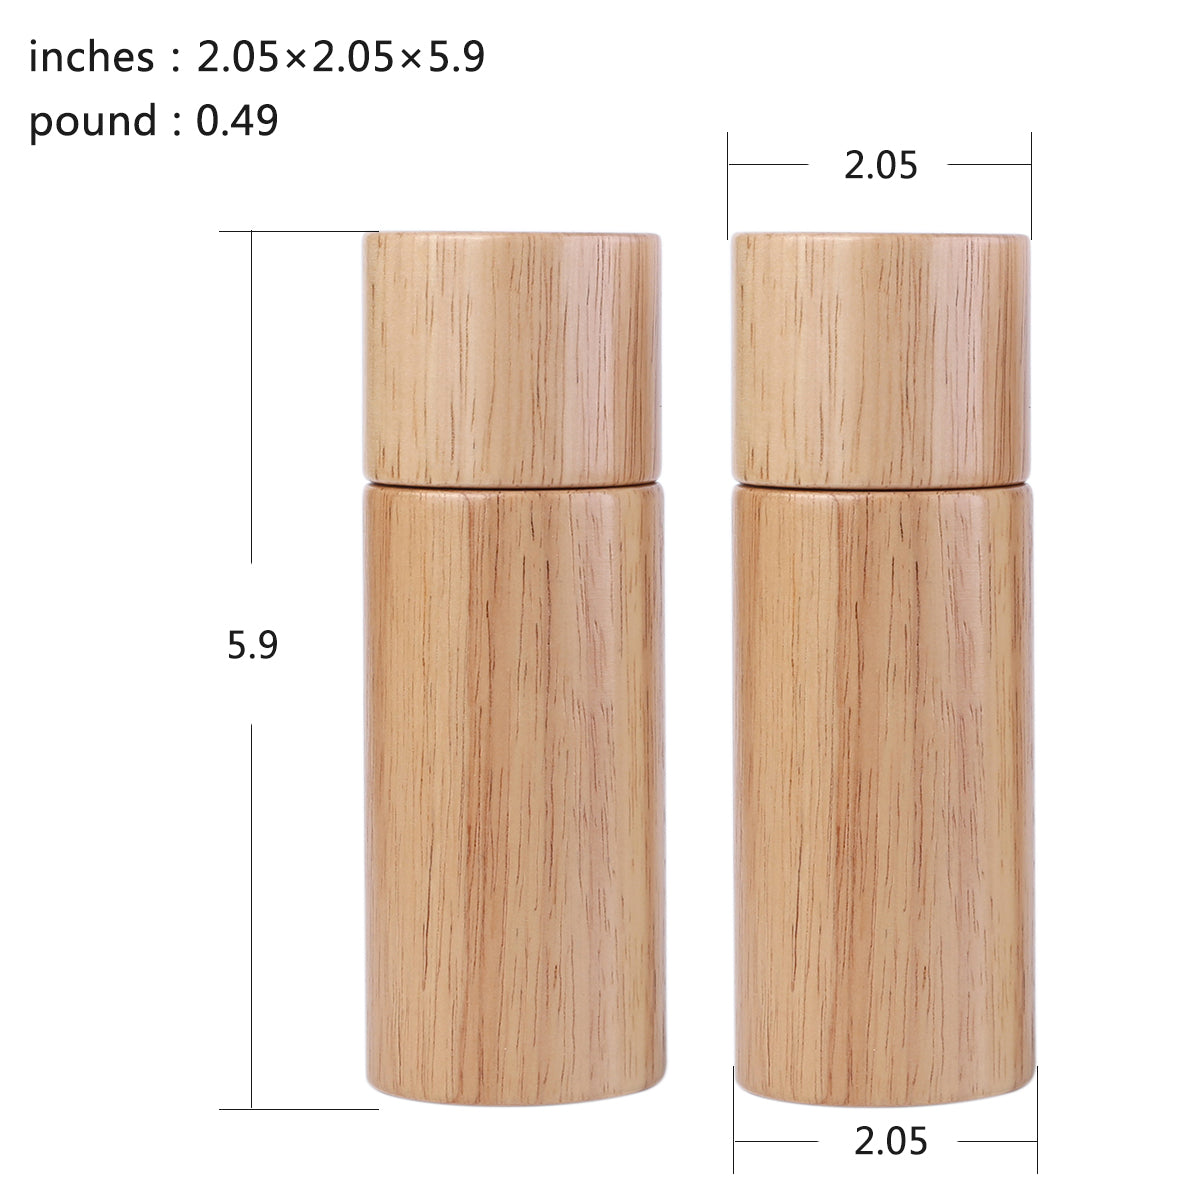 1pc 6-inch White Ceramic Pepper Grinder With Wooden Lid